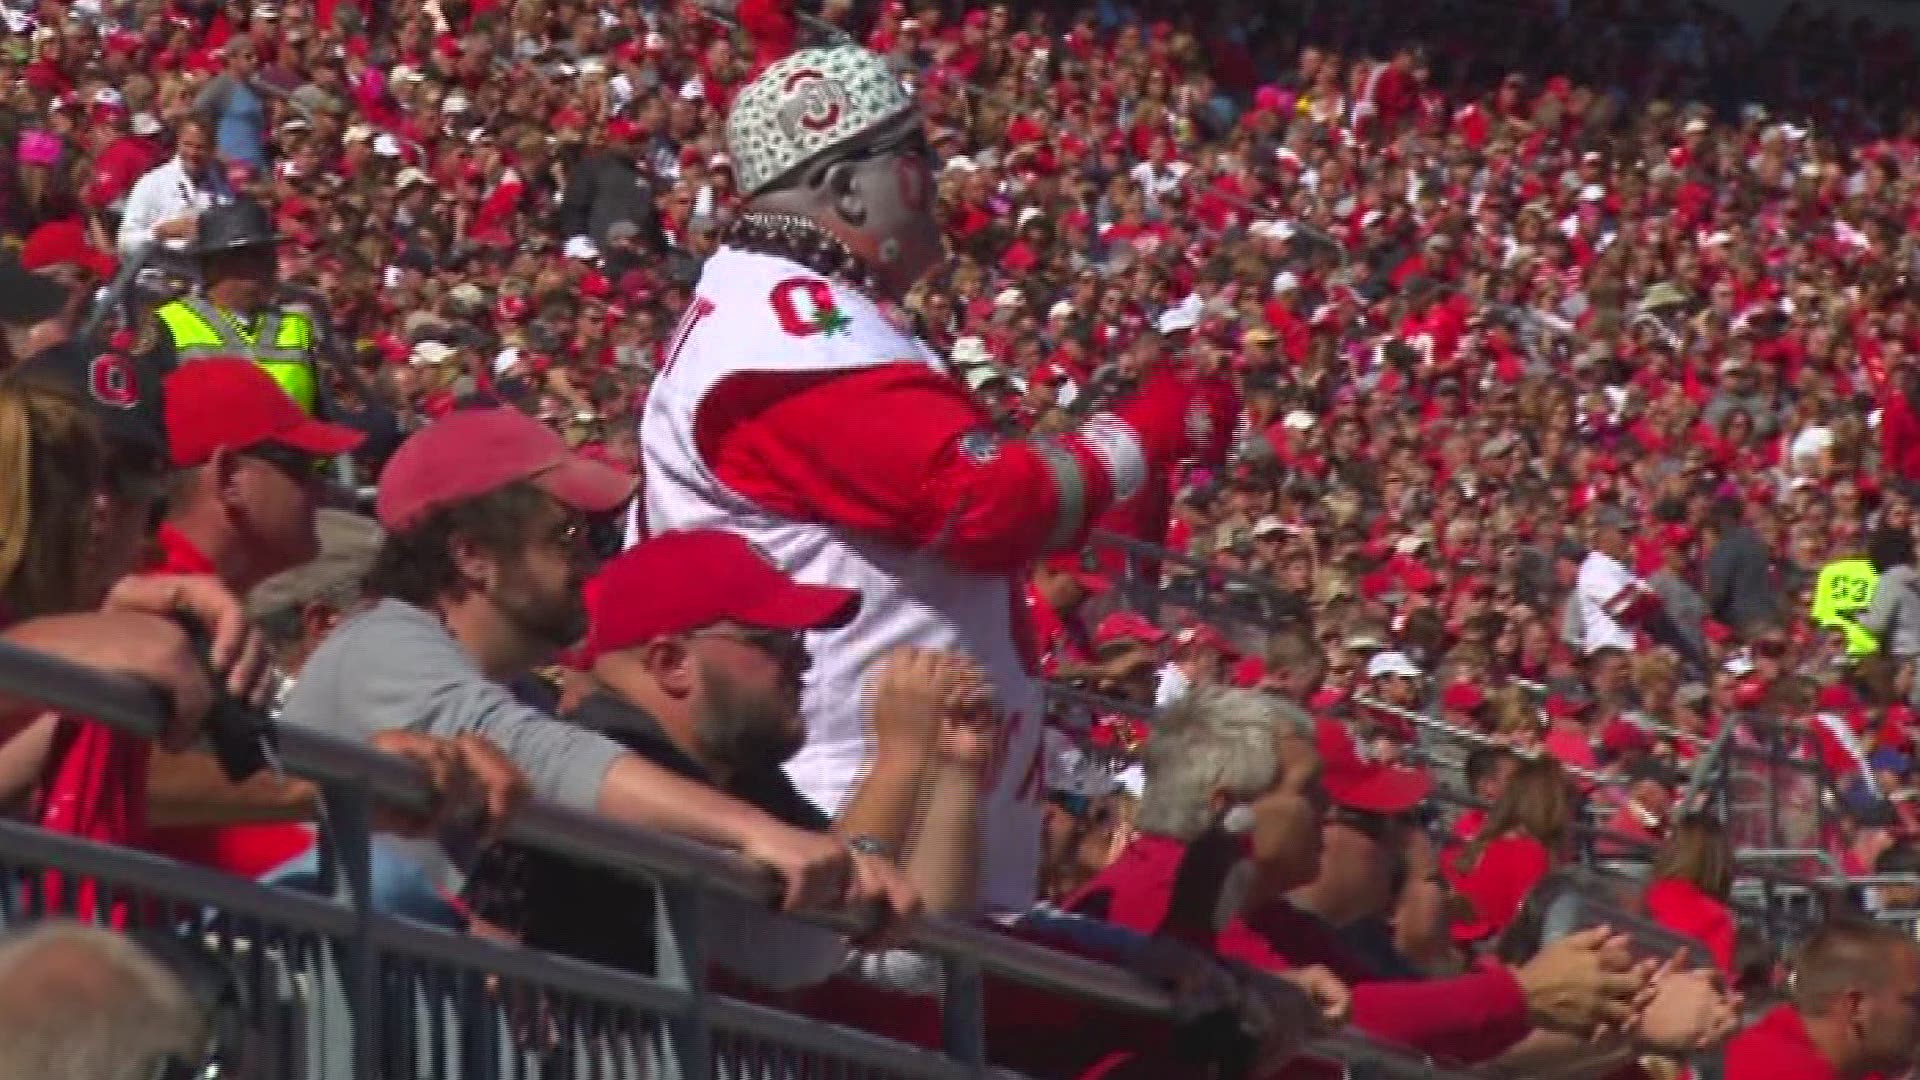 Big Nut is usually busy yelling O-H-I-O, but the Ohio State fan hasn't painted up for over a month.